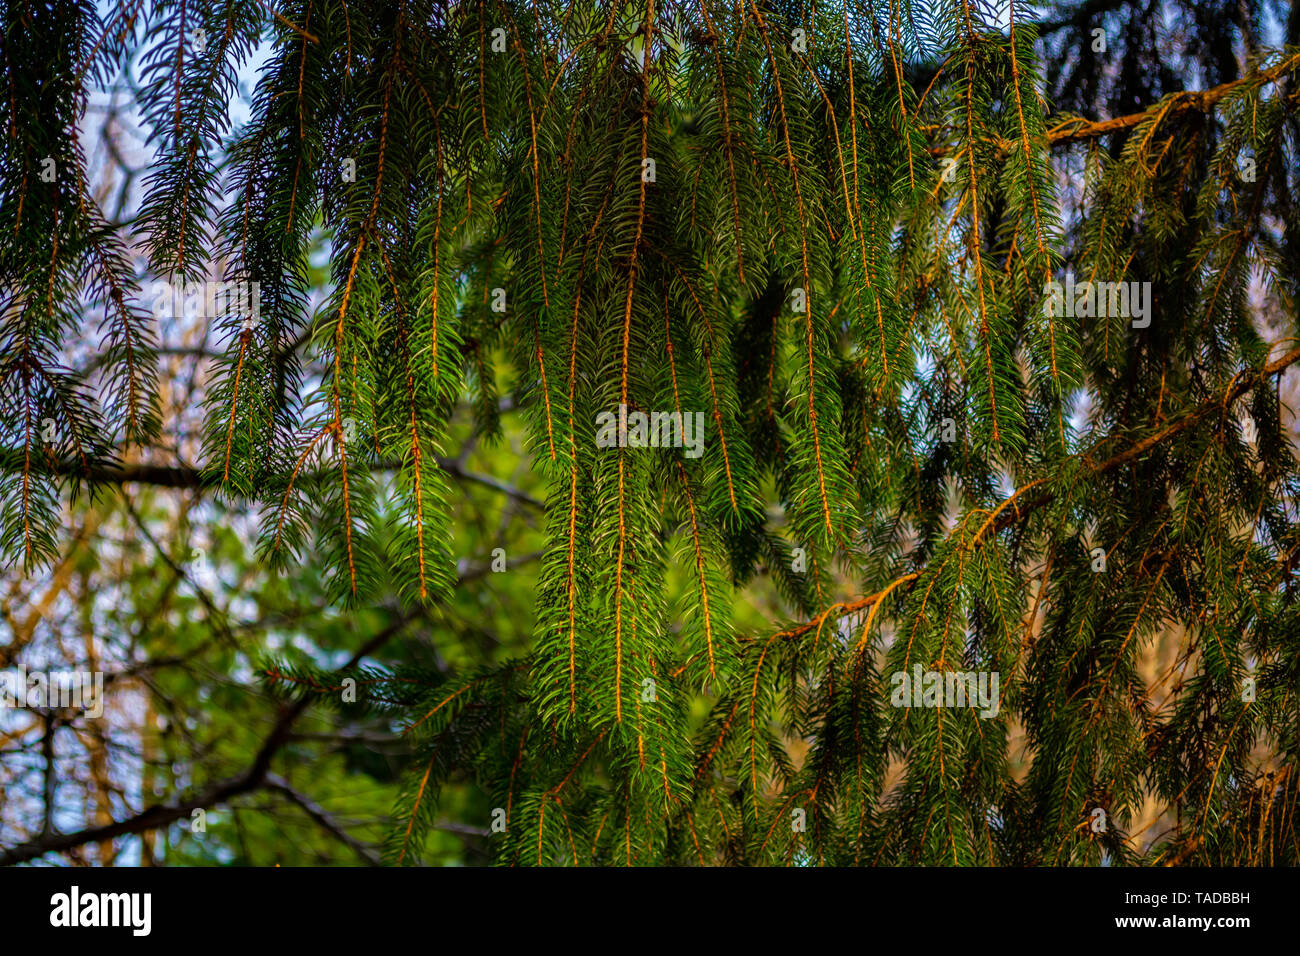 Pine tree branches in a sunlight Stock Photo